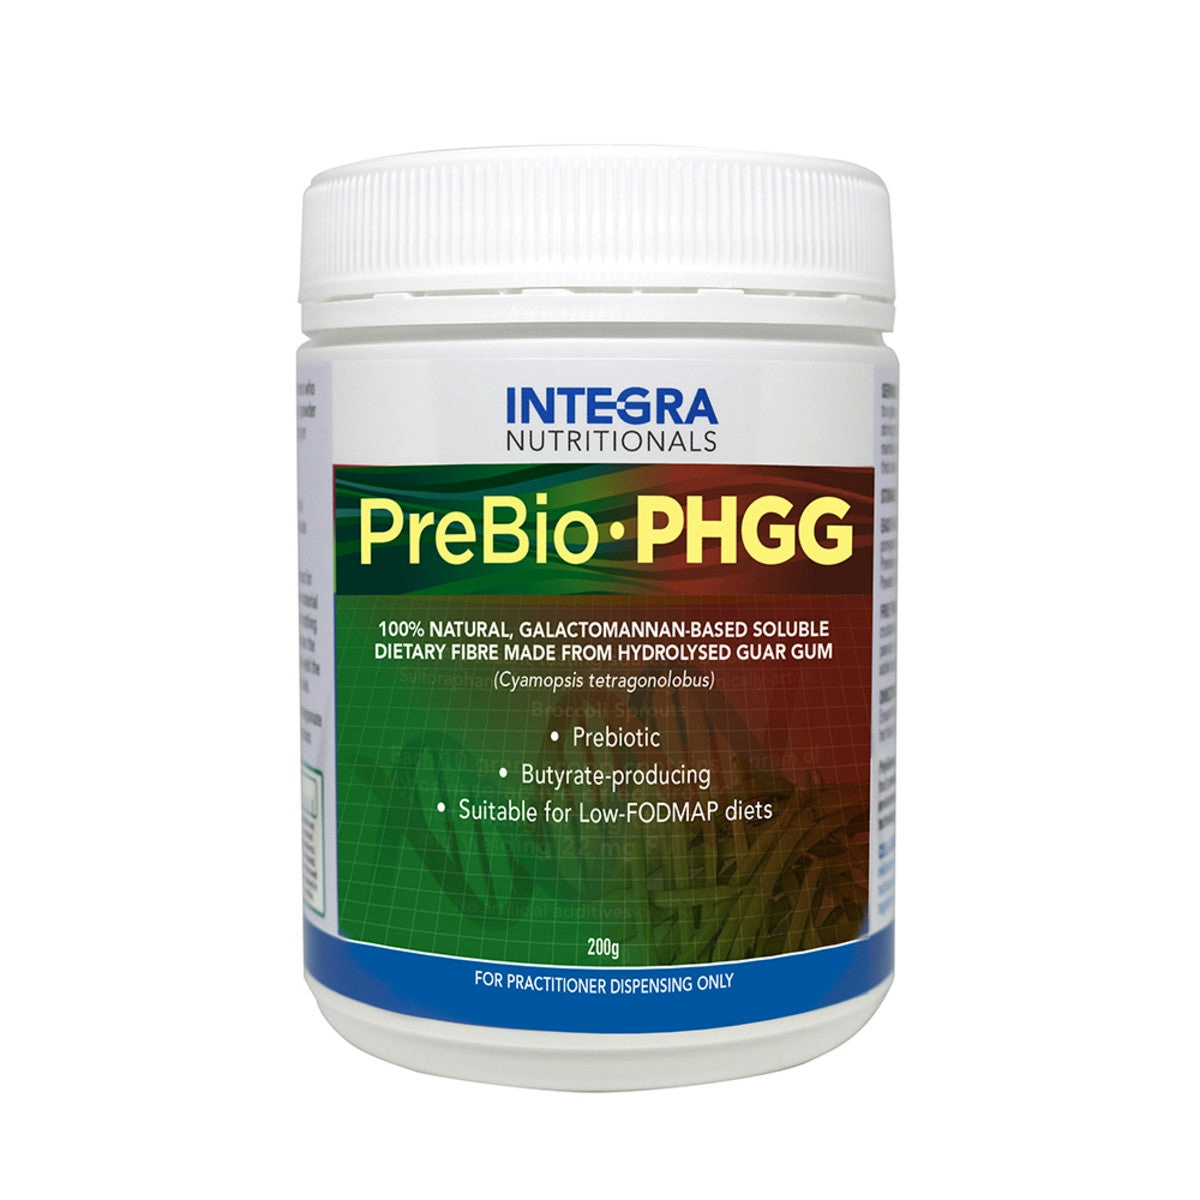 image of Integra Nutritionals PreBio PHGG 200g with white background 